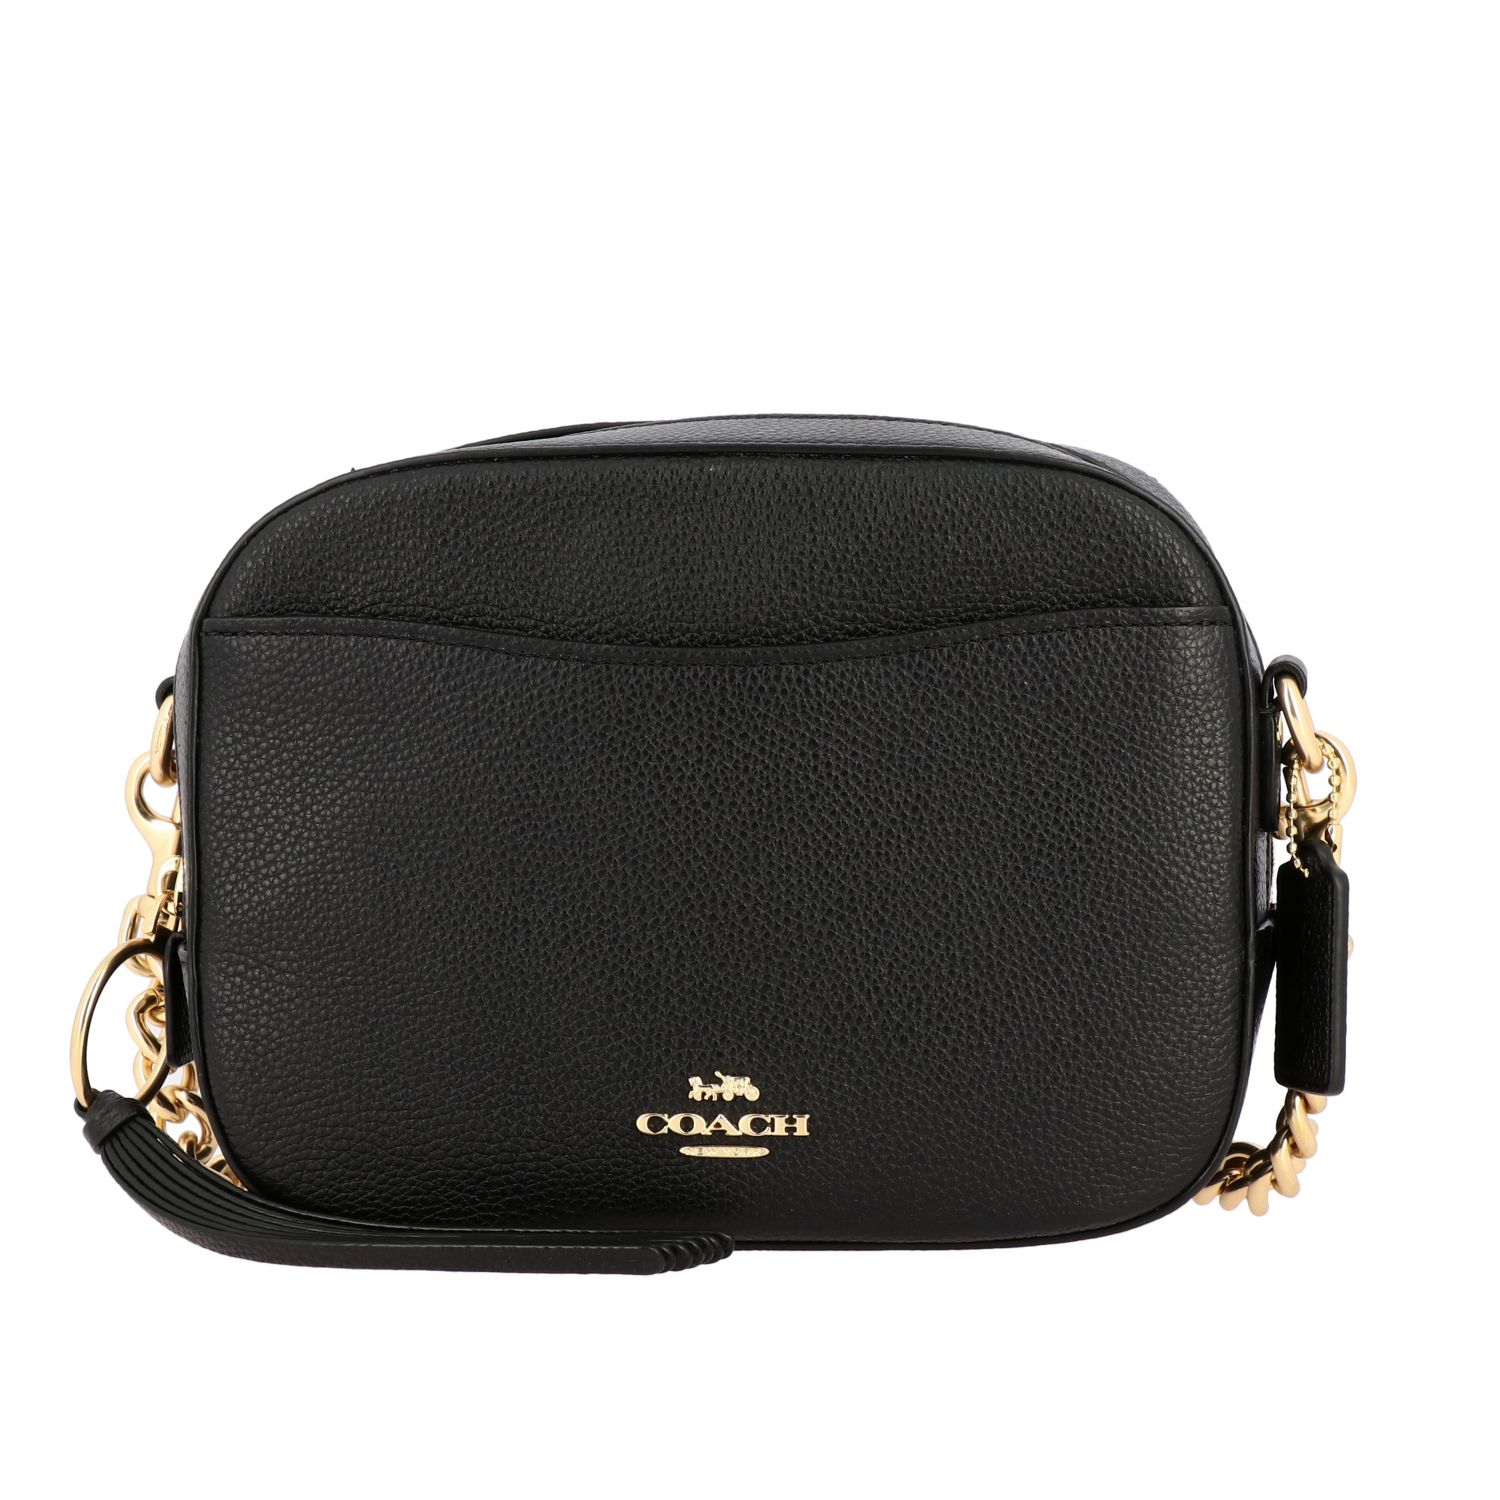 Coach Outlet Crossbody Bags For Women Black Coach Crossbody Bags 29411 Blk Online At Gigliocom 